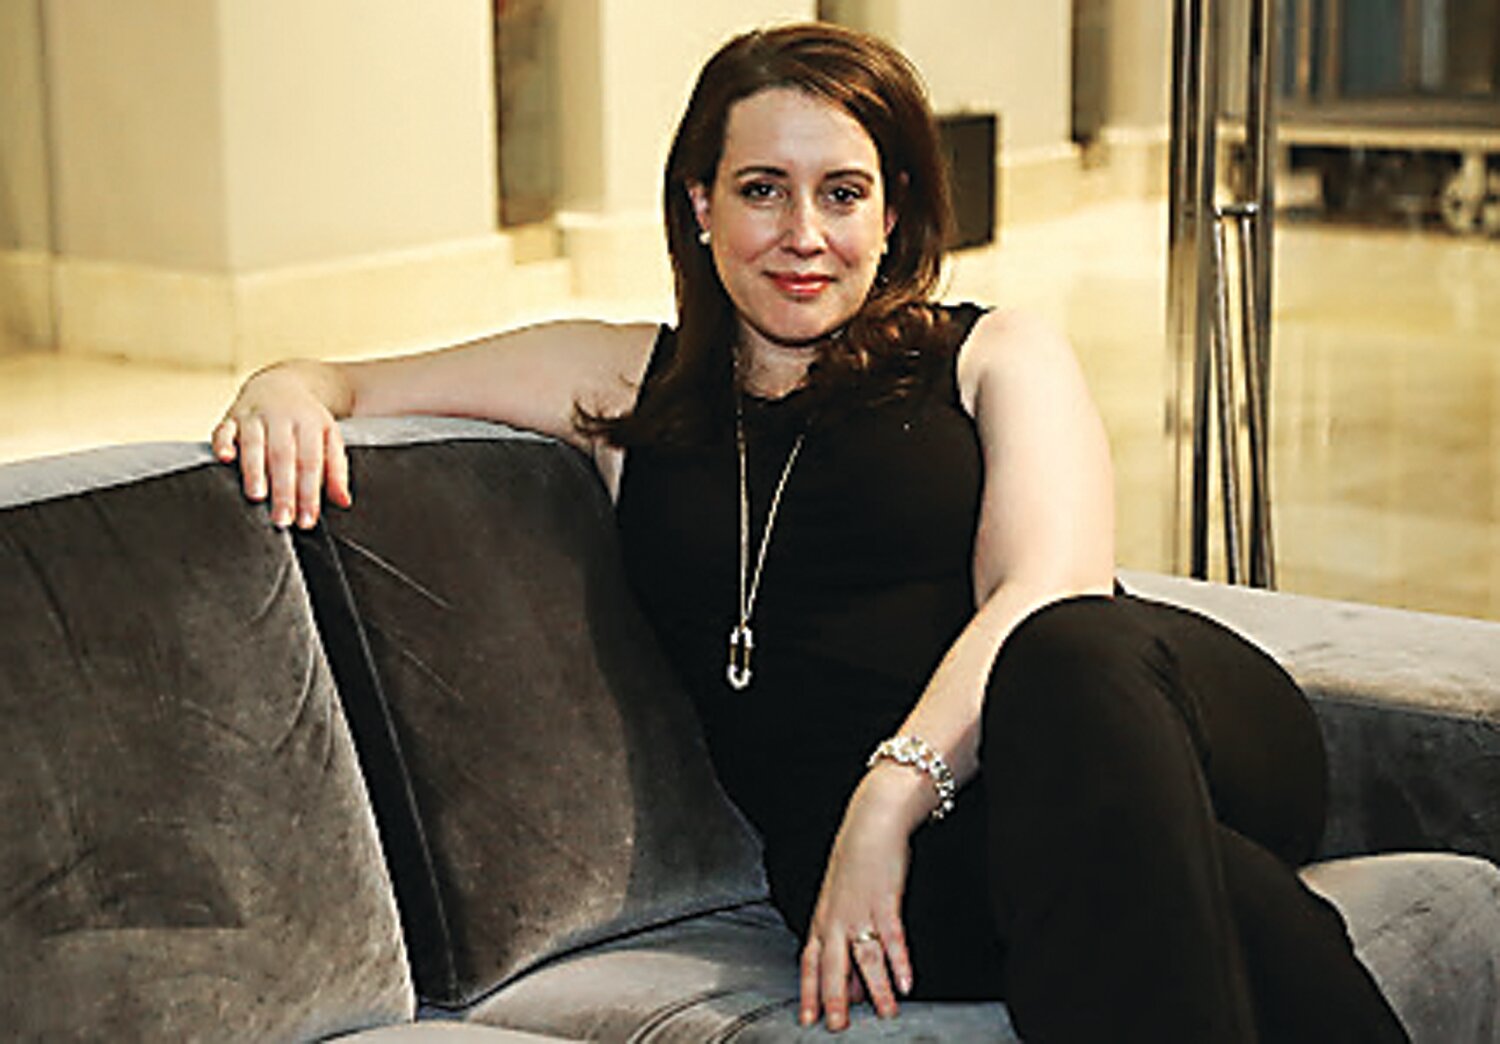 Julia Quinn, the author of the New York Times Bestselling “Bridgerton” book series will be the keynote speaker at the 2023 Bucks County Book Festival.